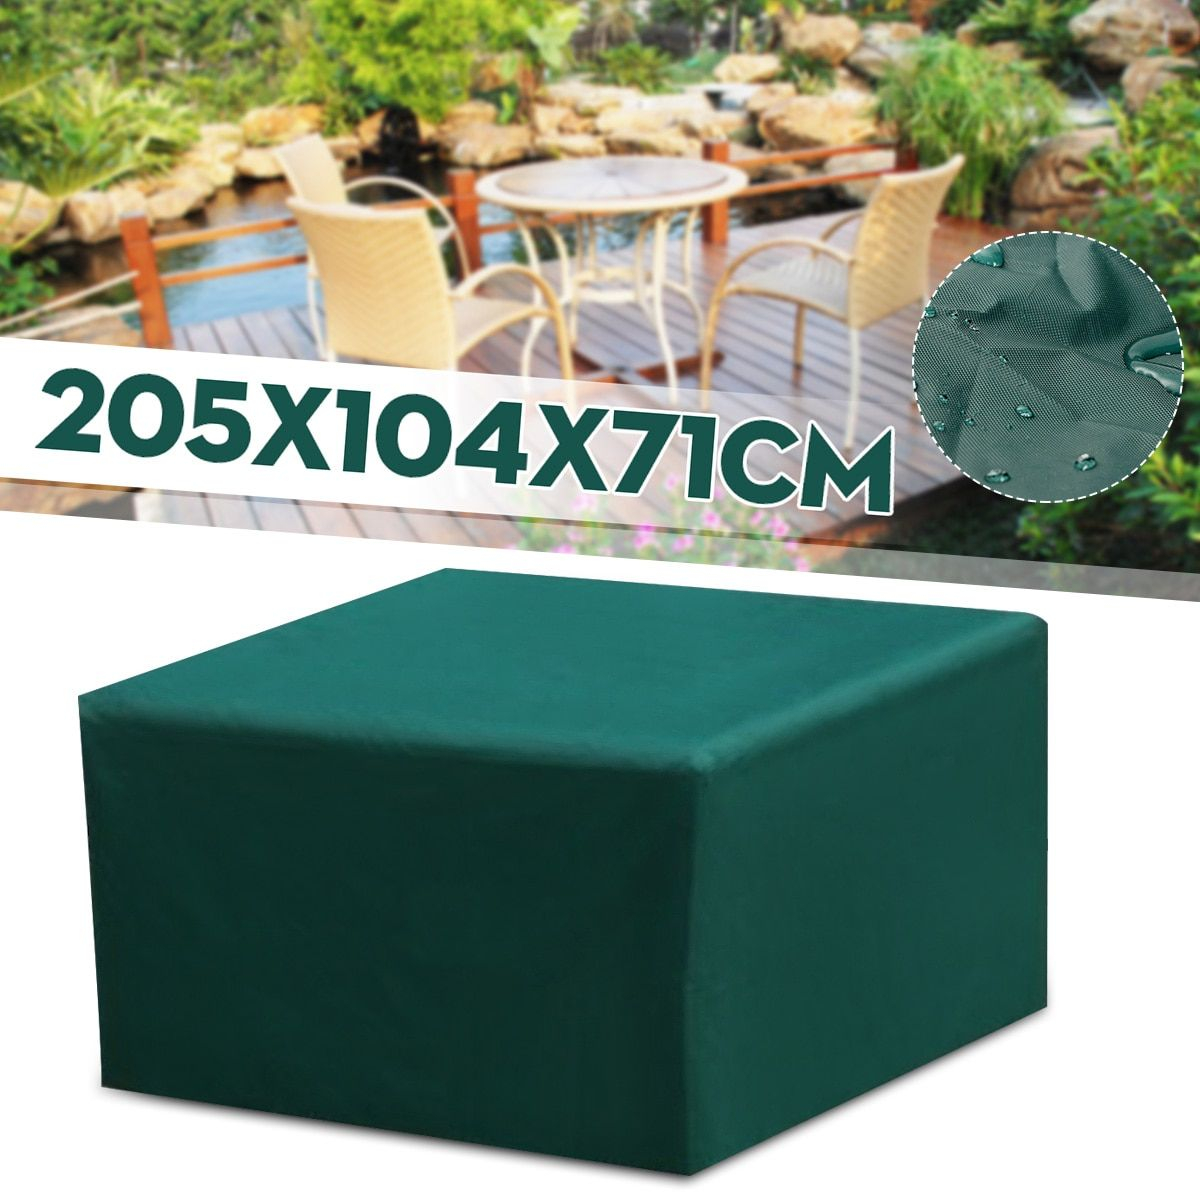 205x104x71cm Garden Outdoor Furniture Waterproof Breathable with dimensions 1200 X 1200